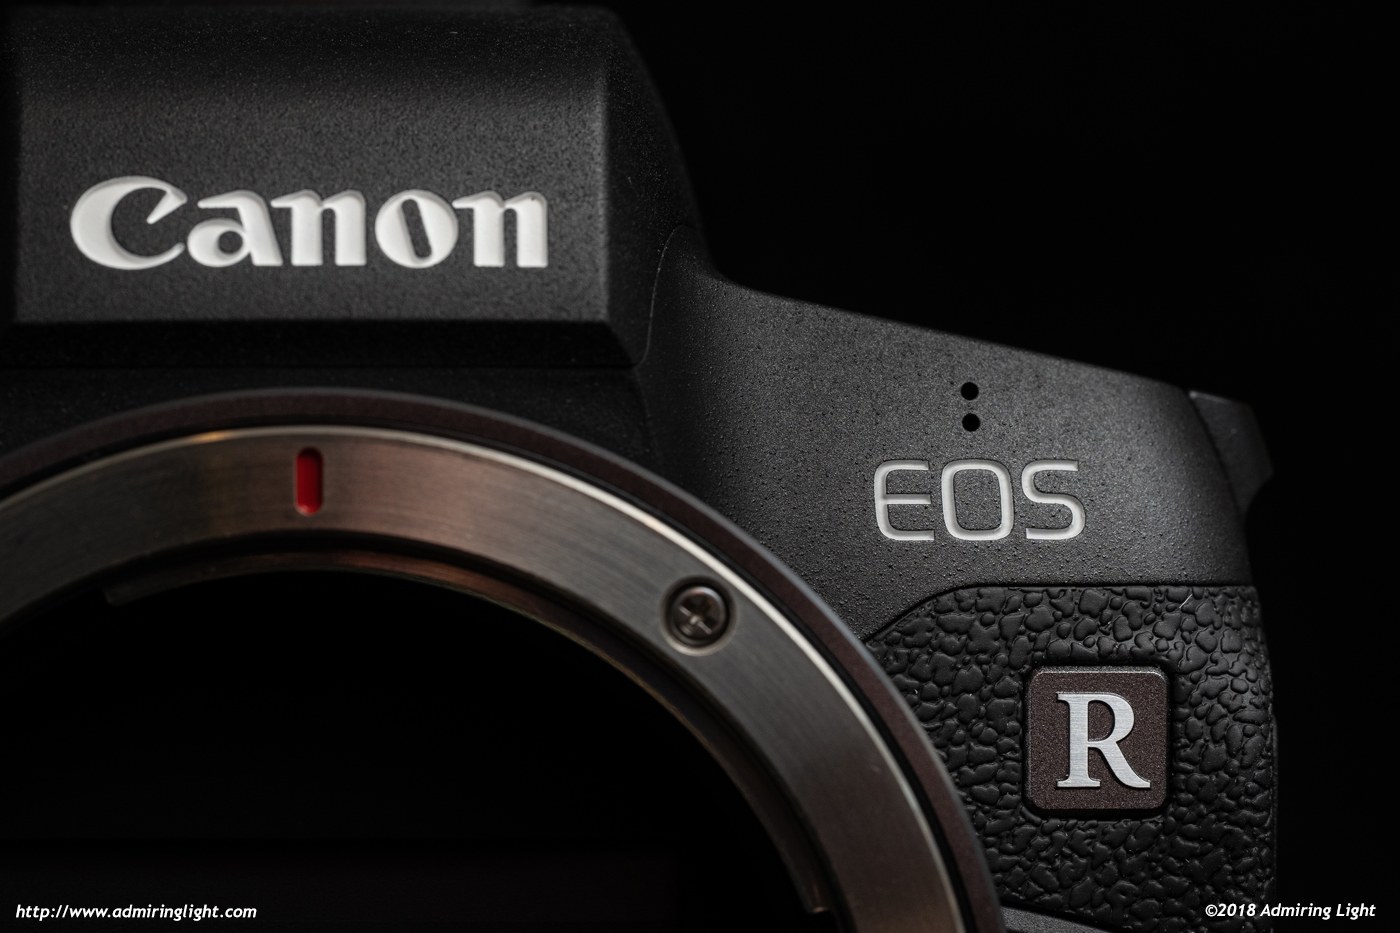 Review: Canon EOS R - Page 3 of 5 - Admiring Light